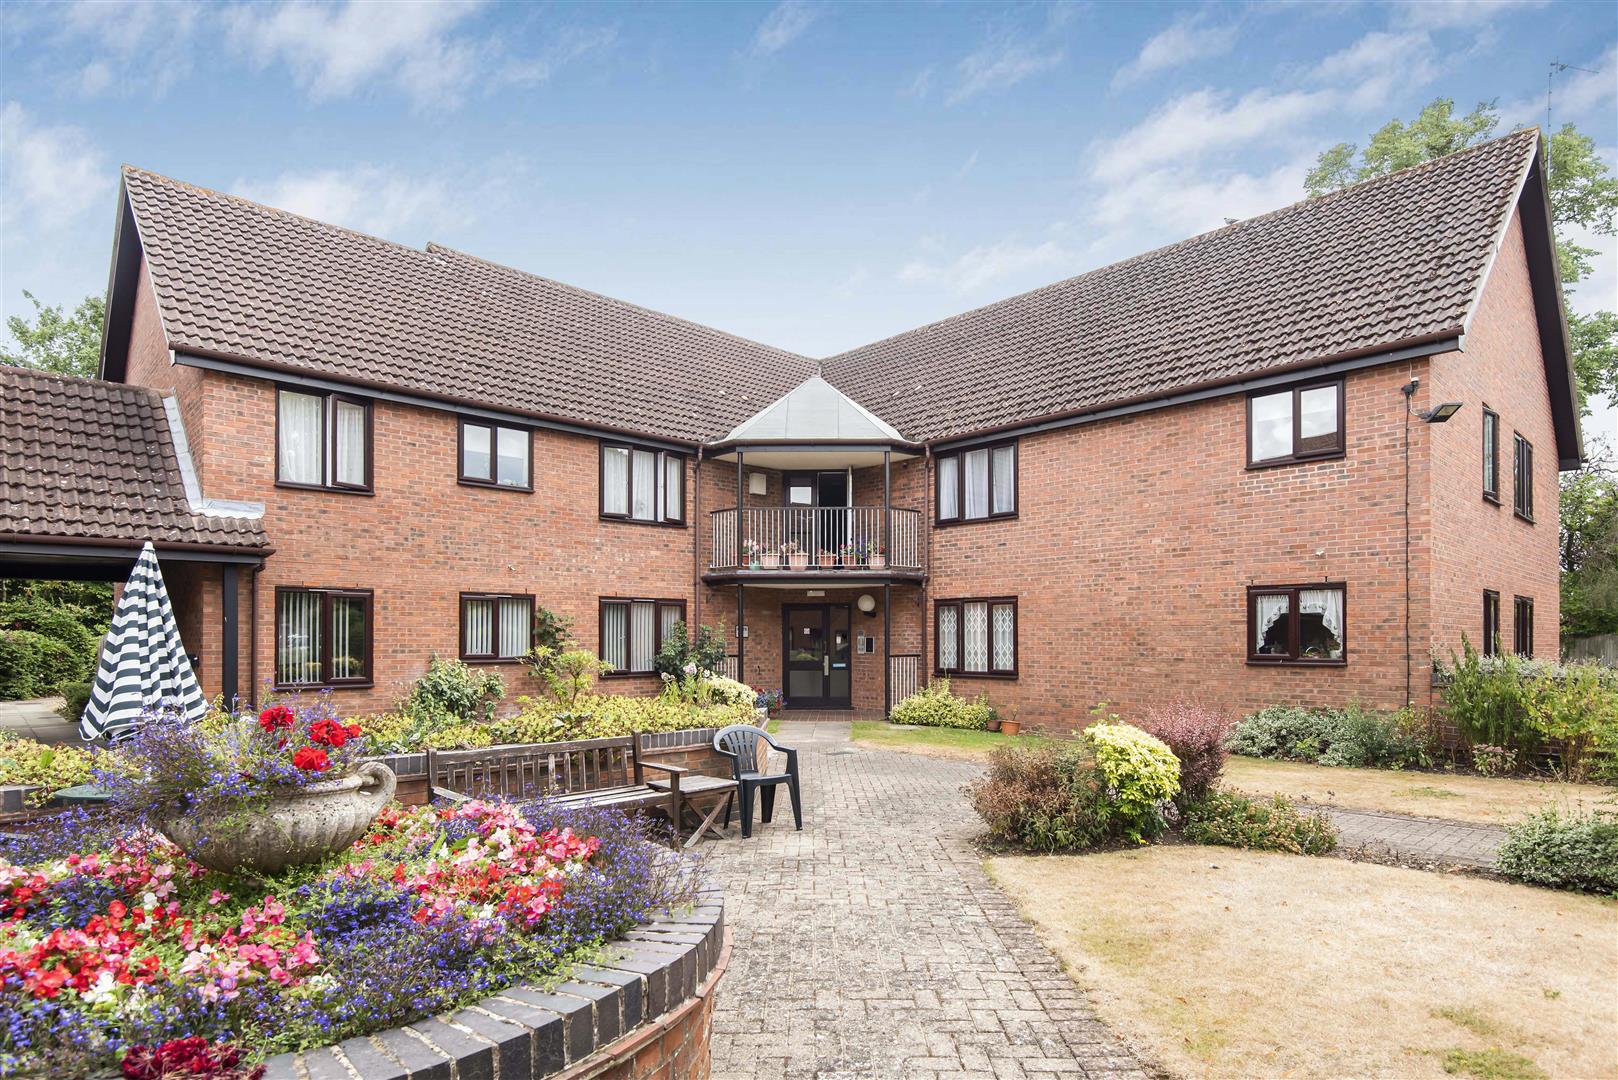 Chiltern Court St. Barnabas Road Emmer Green house for sale in Reading